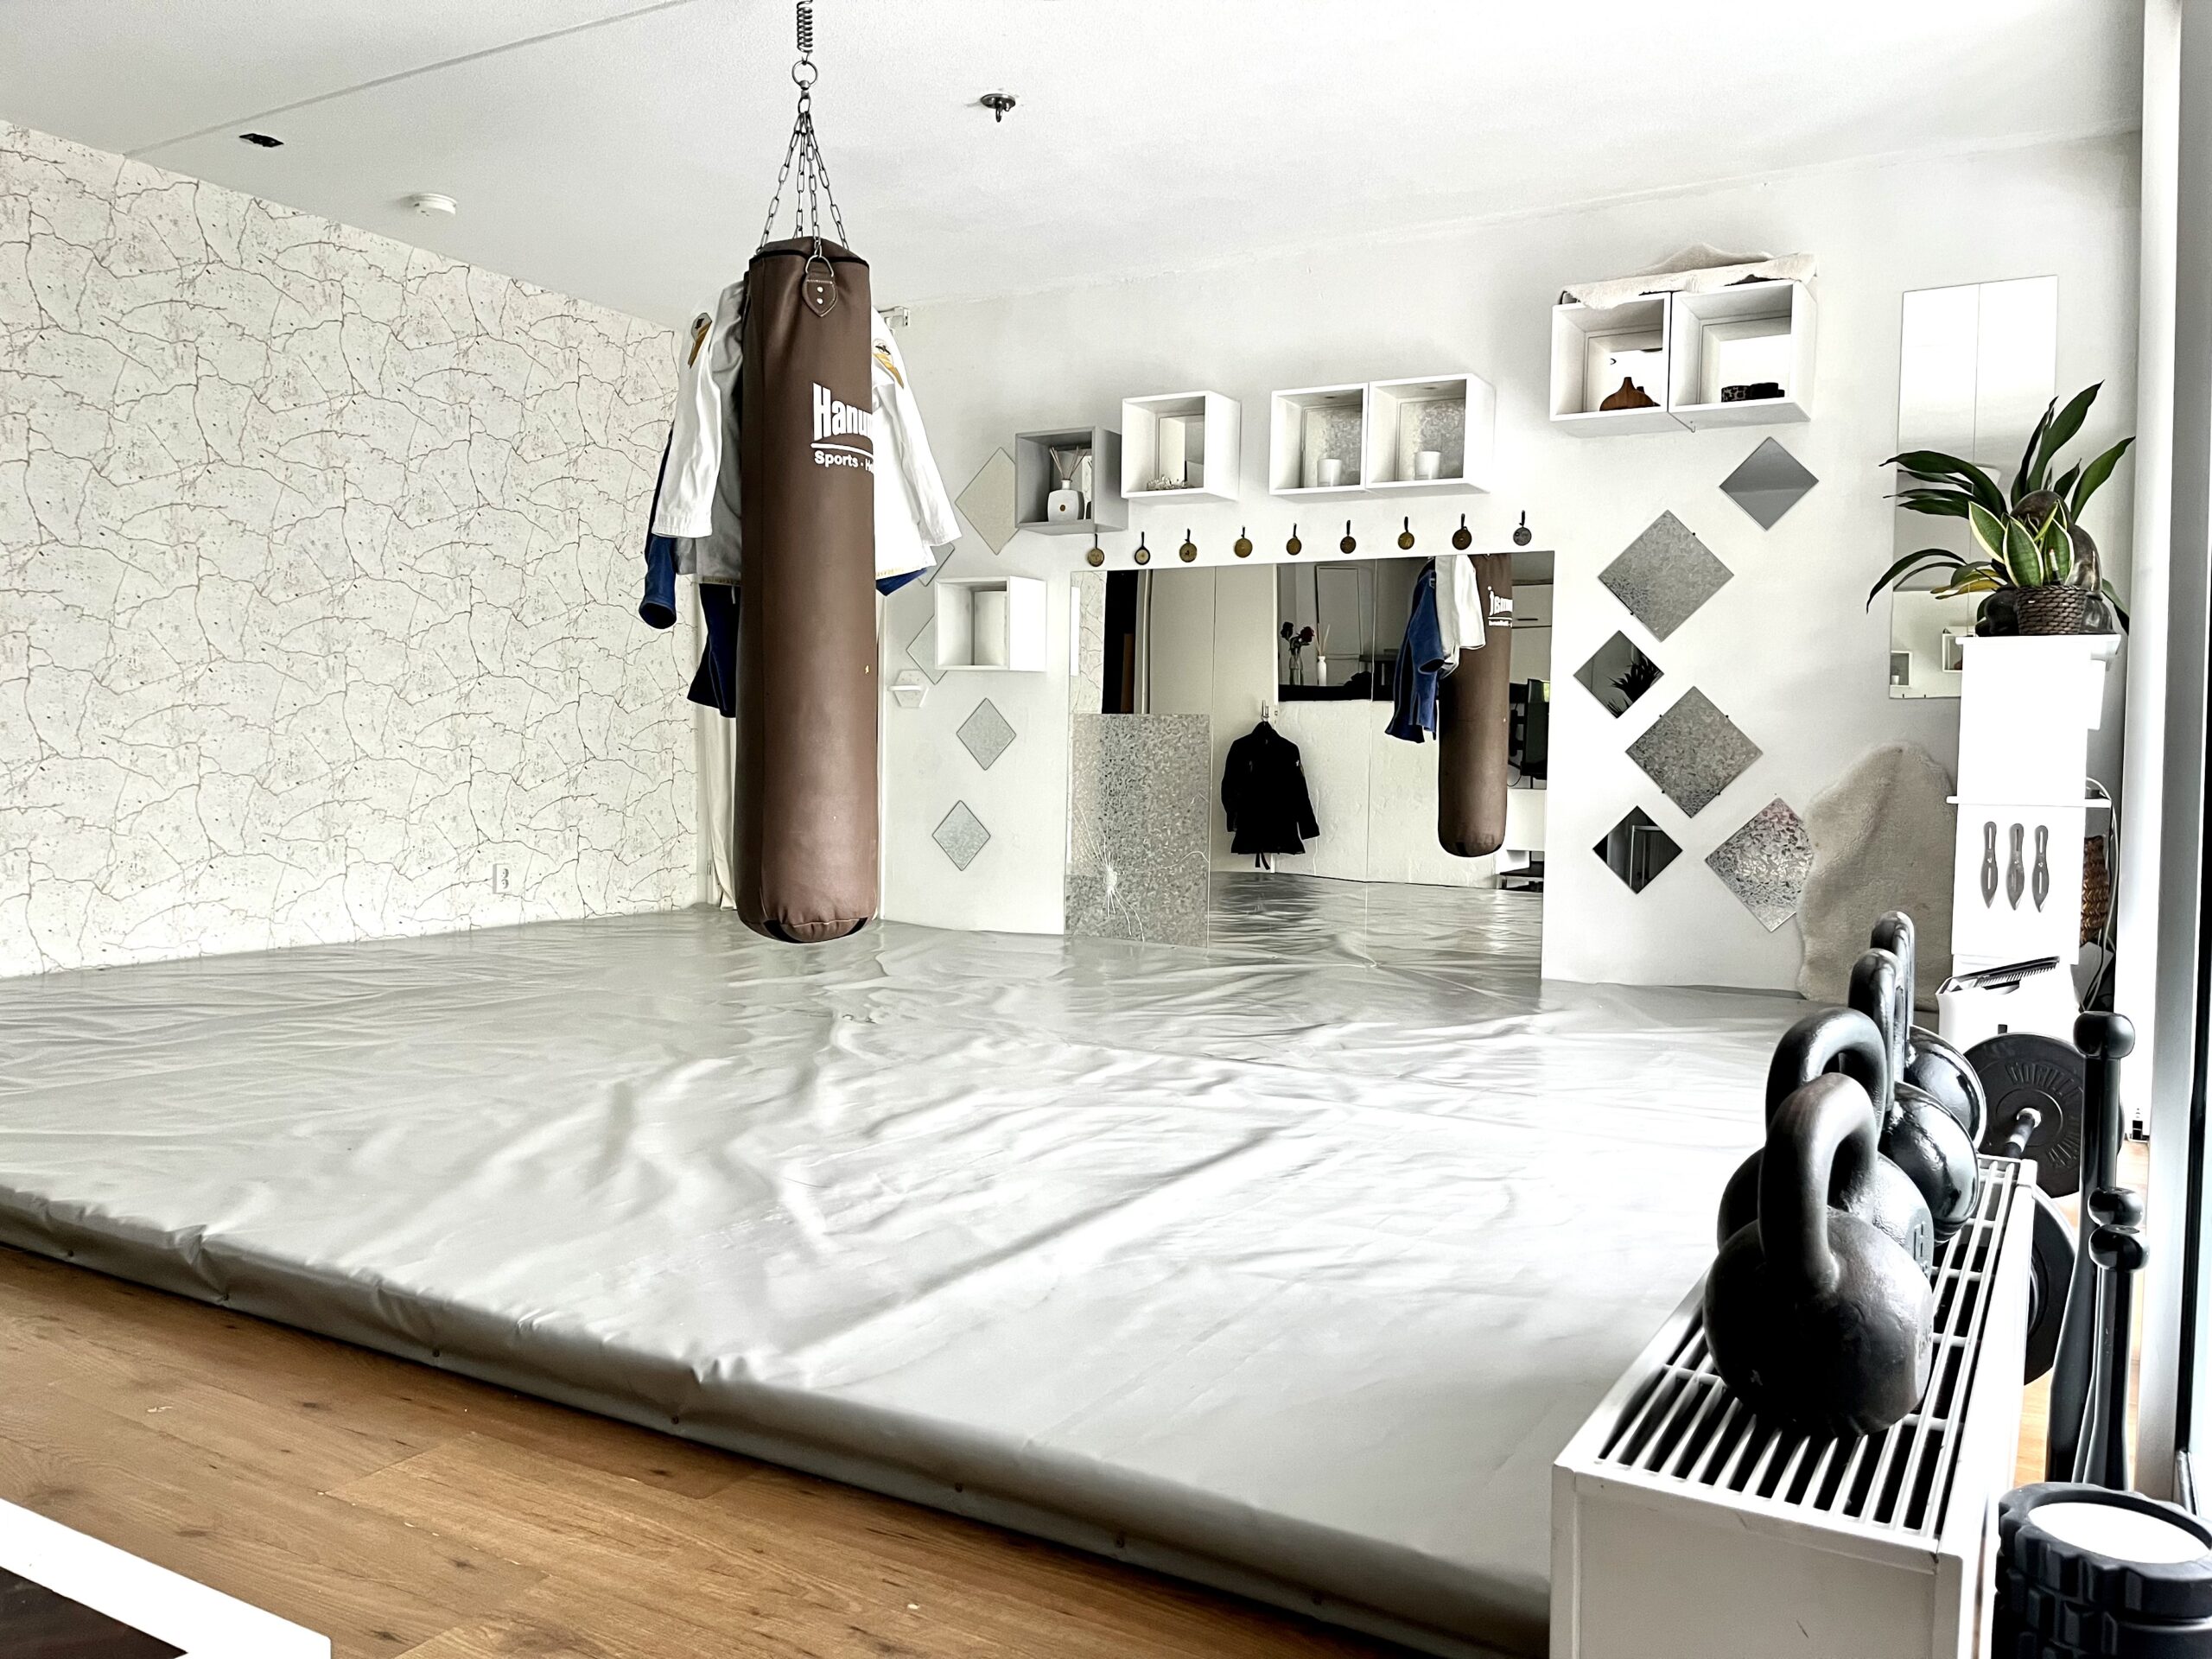 Dojo with boxing sack and matted floor